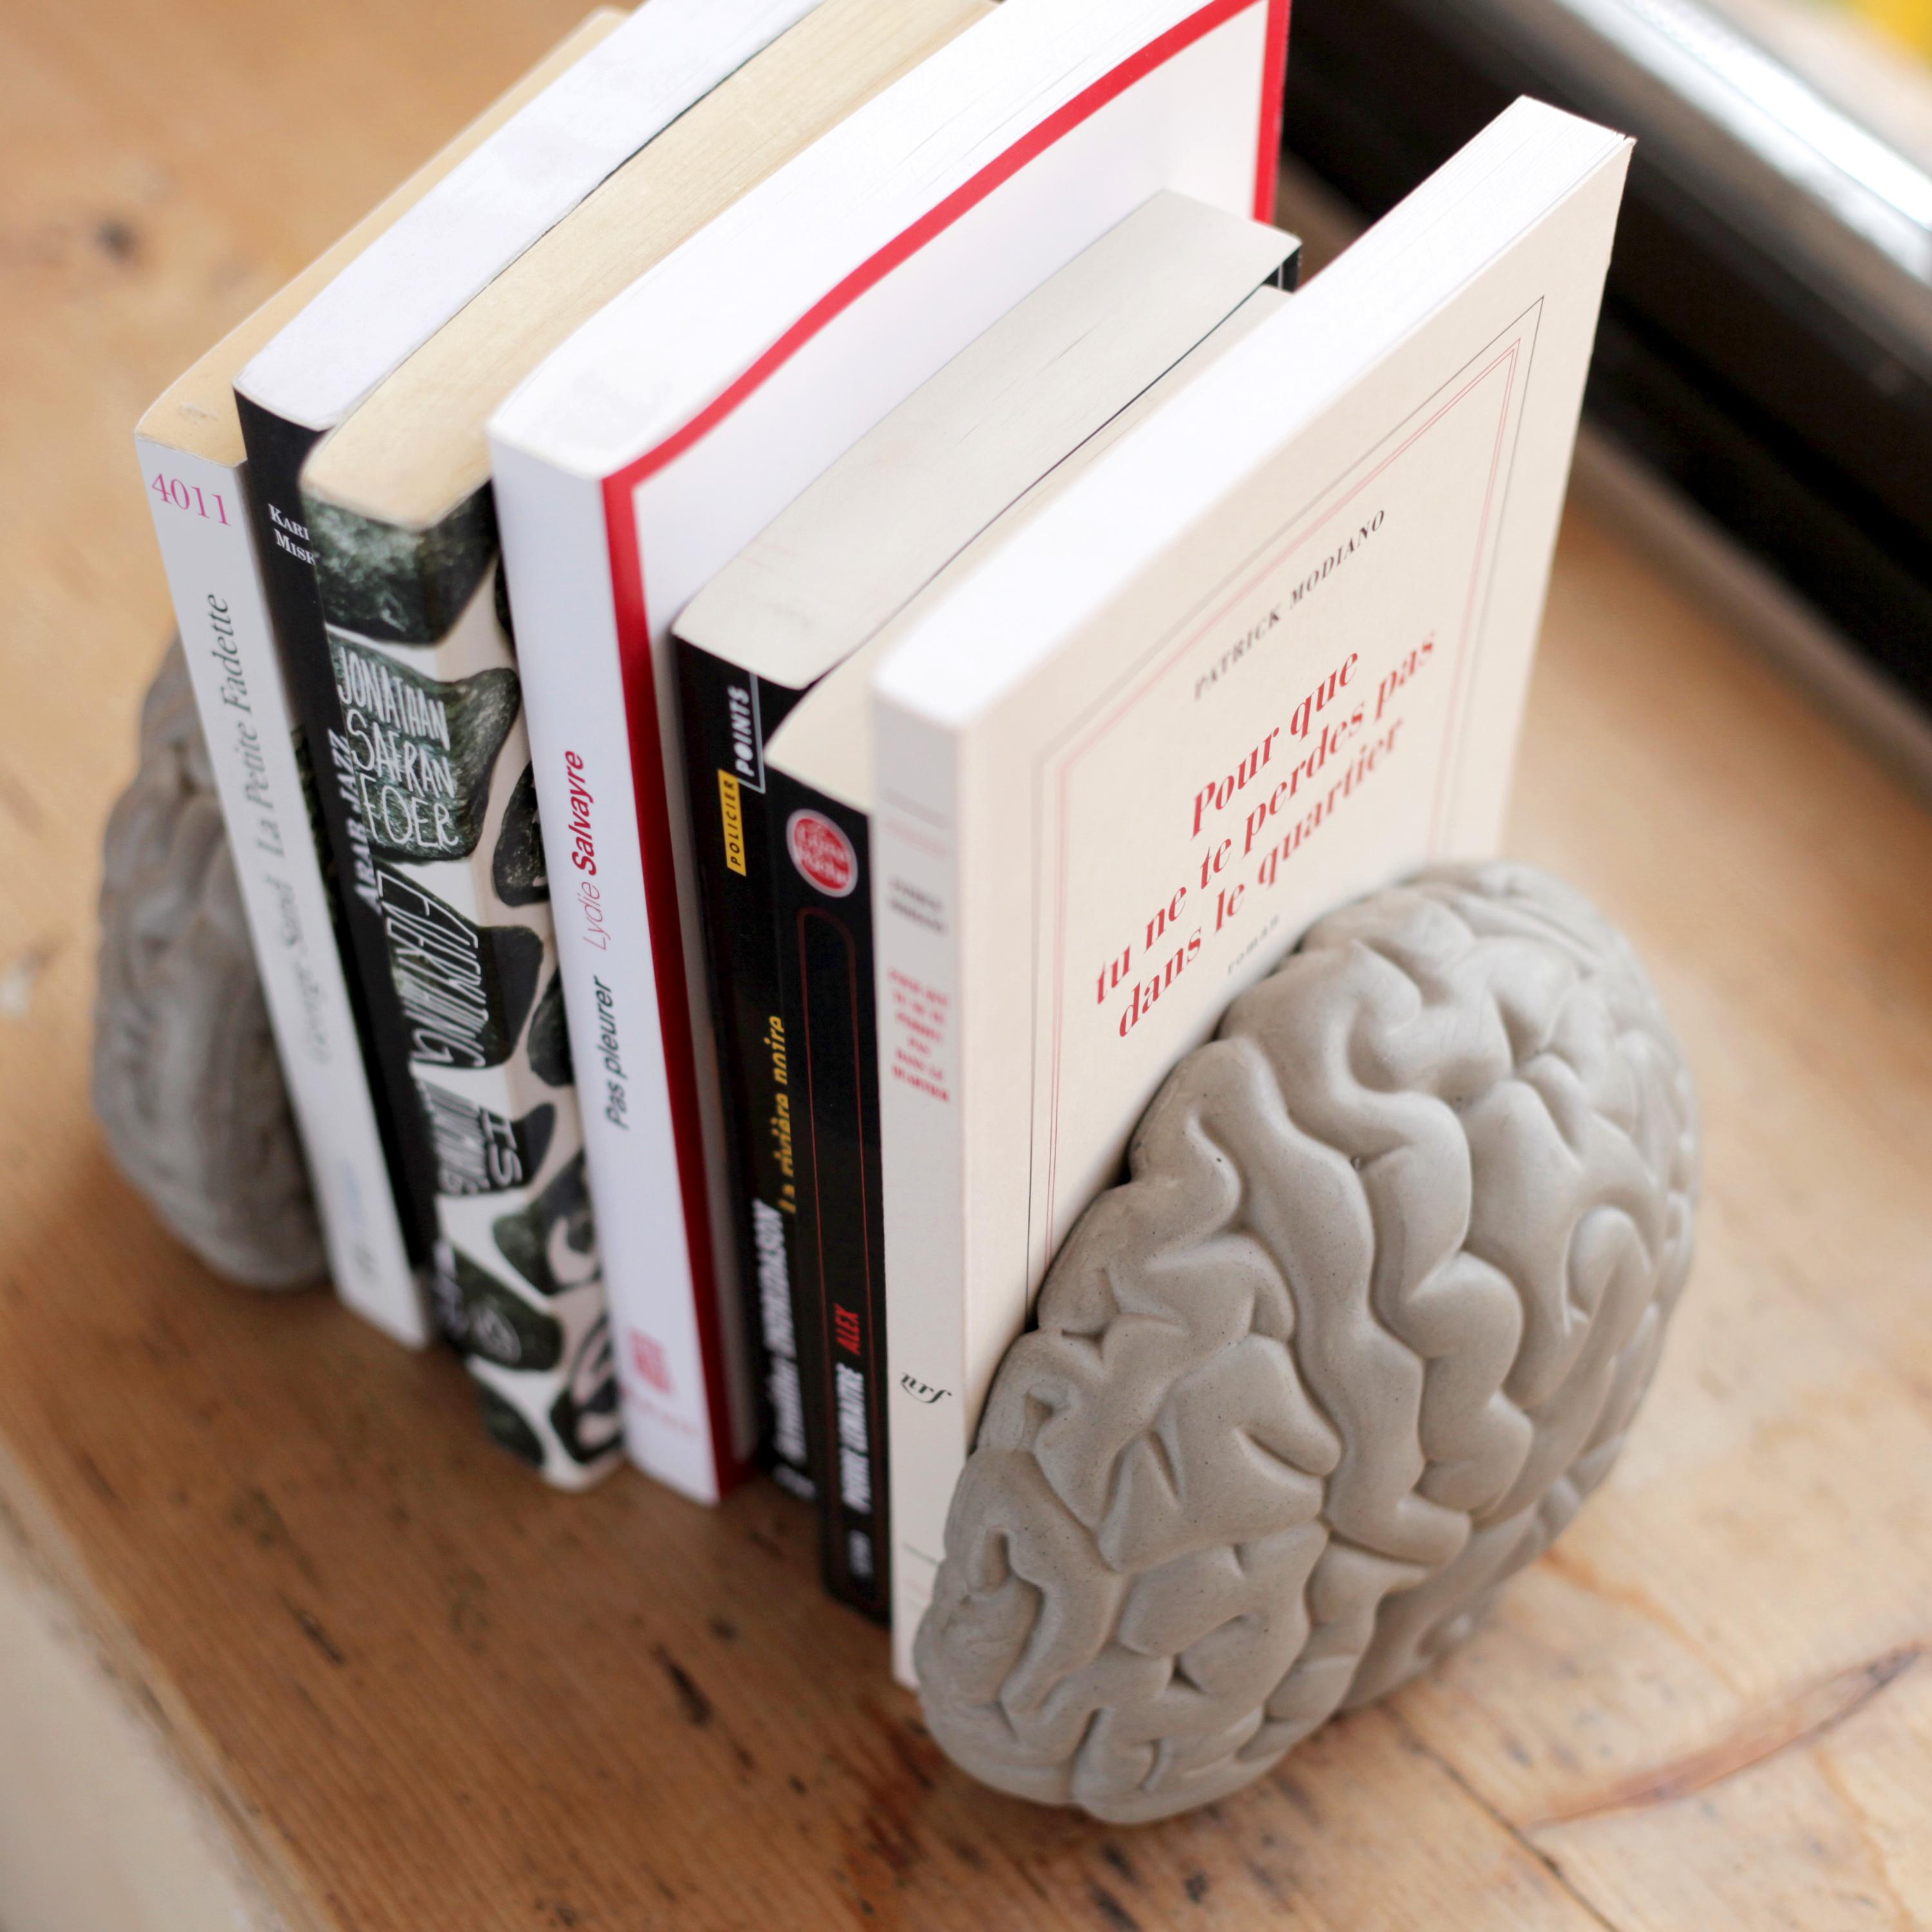 The concrete grey matters book ends designed by Bertrand Jayr for Lyon Béton put the hemispheres of the brain literally at either end of the houses of our knowledge. It brings a fun and functional way to store and organize your personal library with